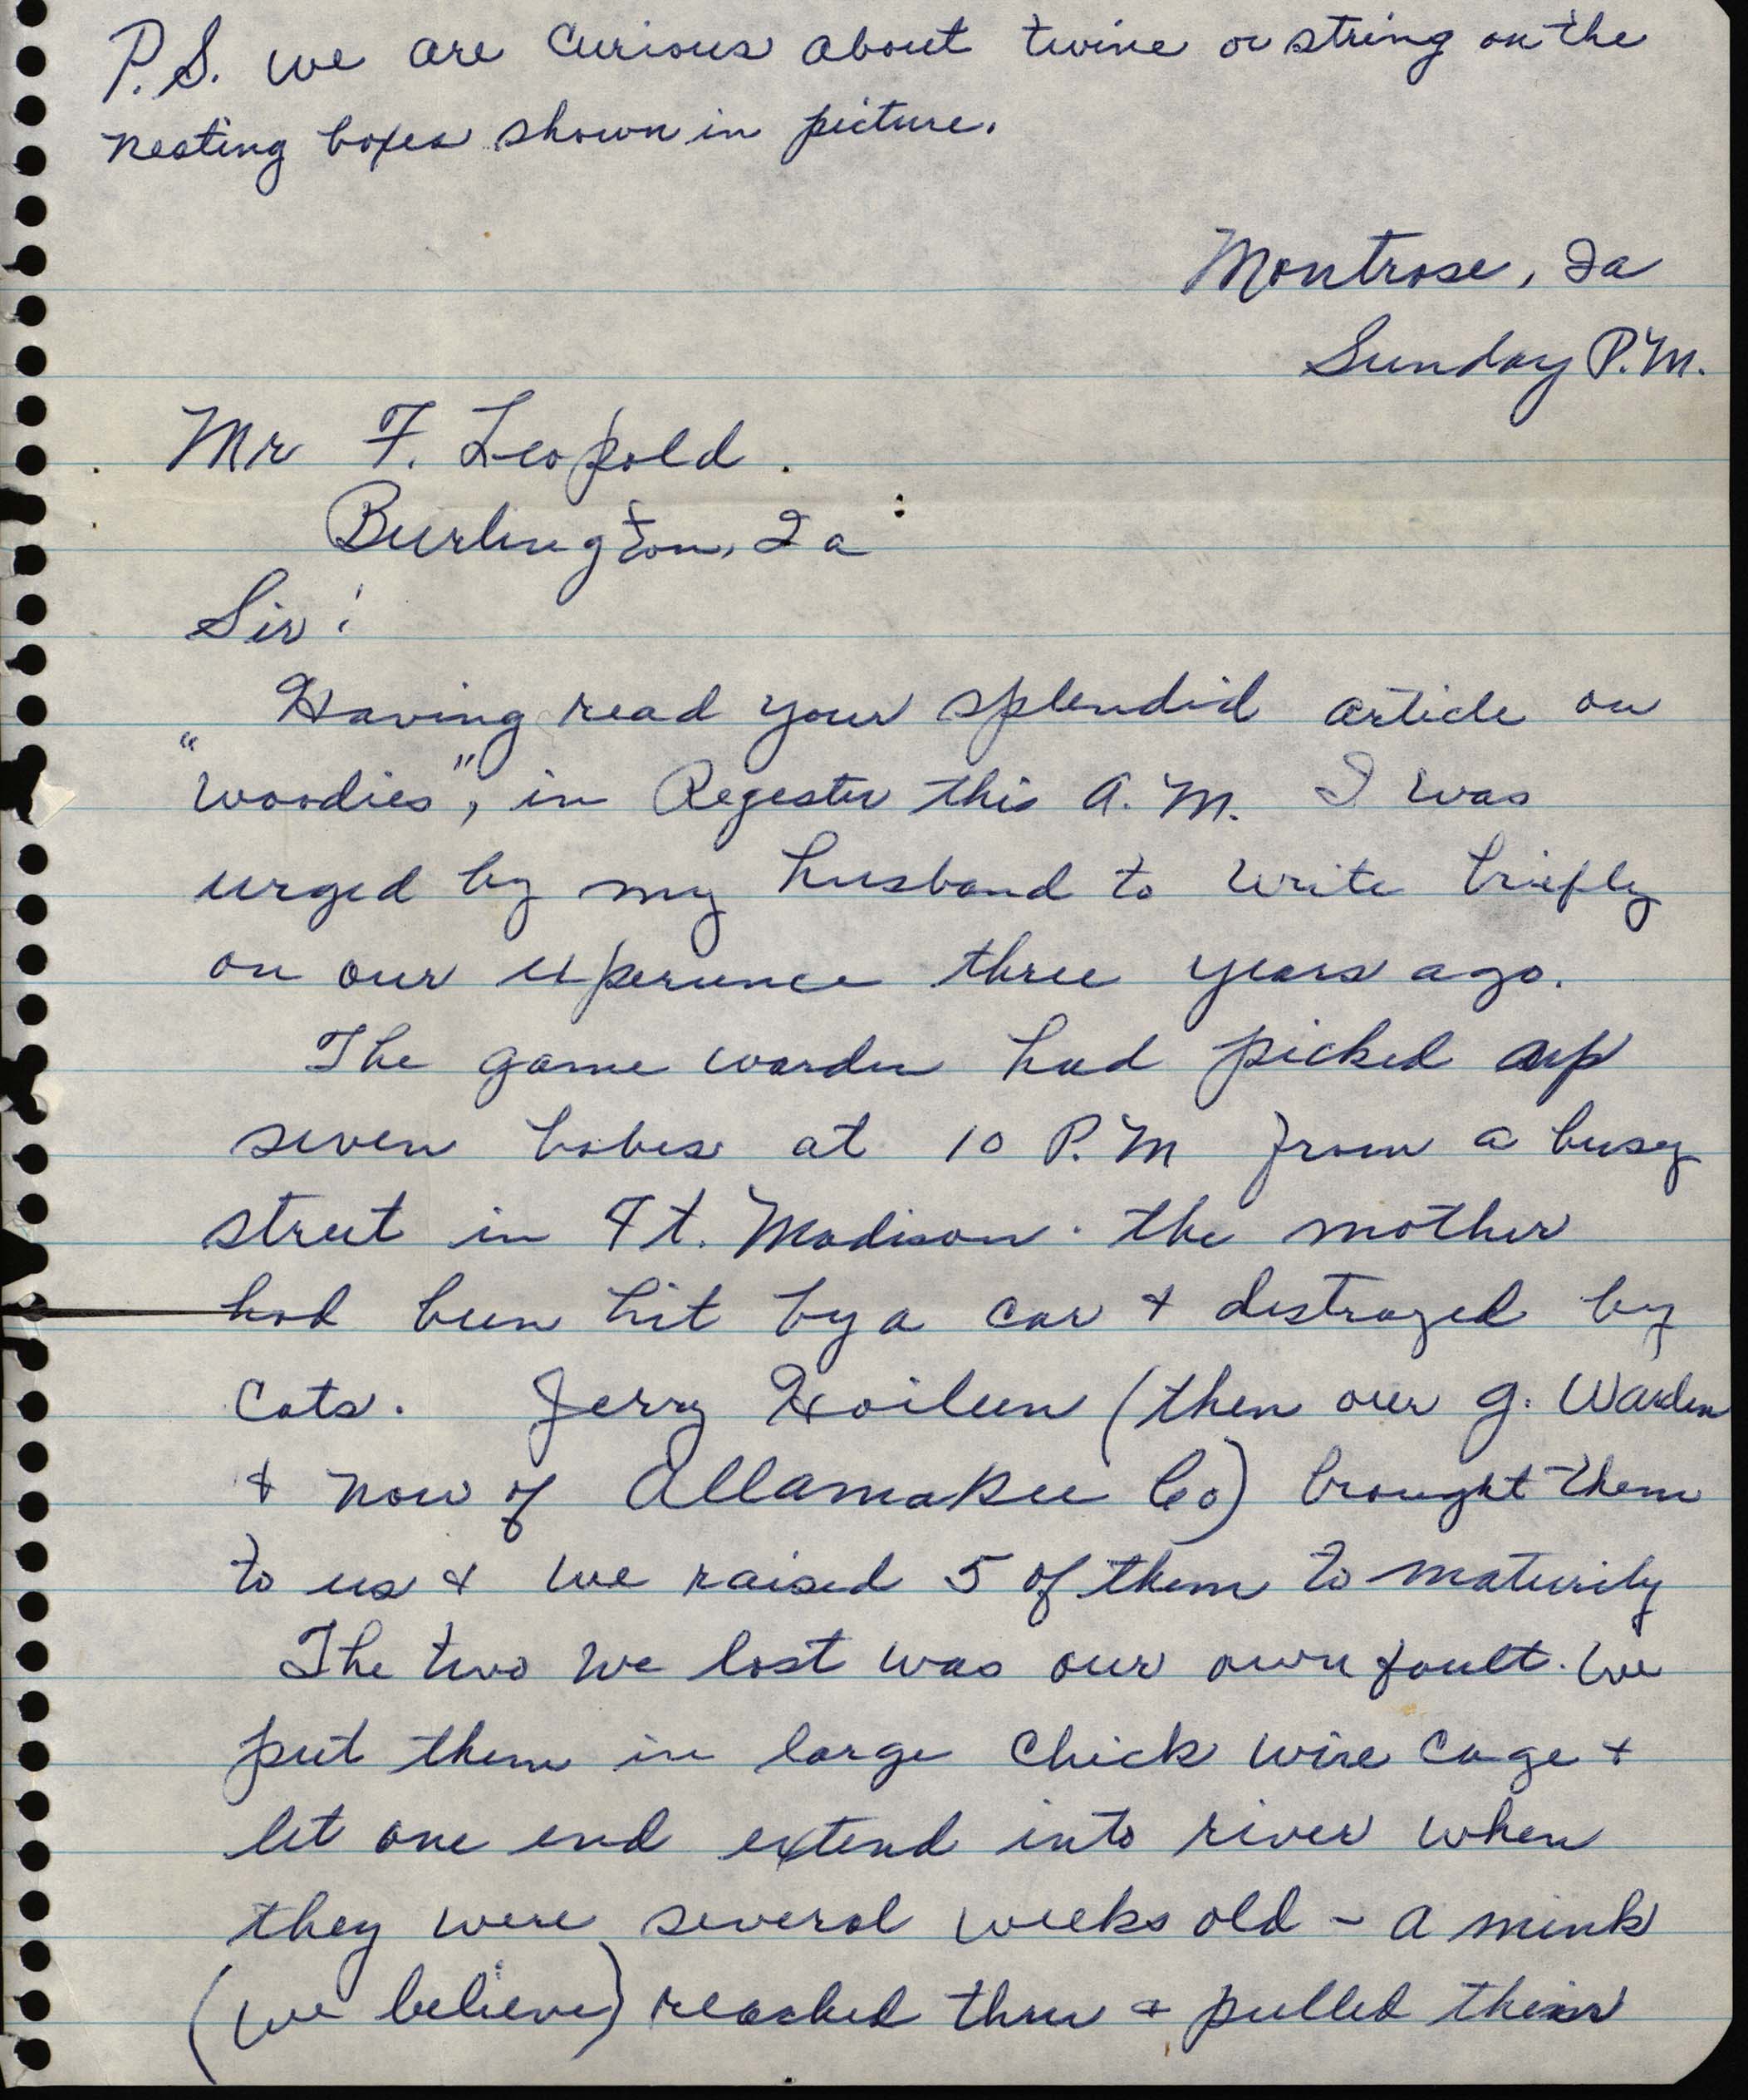 Grace McManis letter to Frederic Leopold regarding Wood Ducks, May 15, 1966